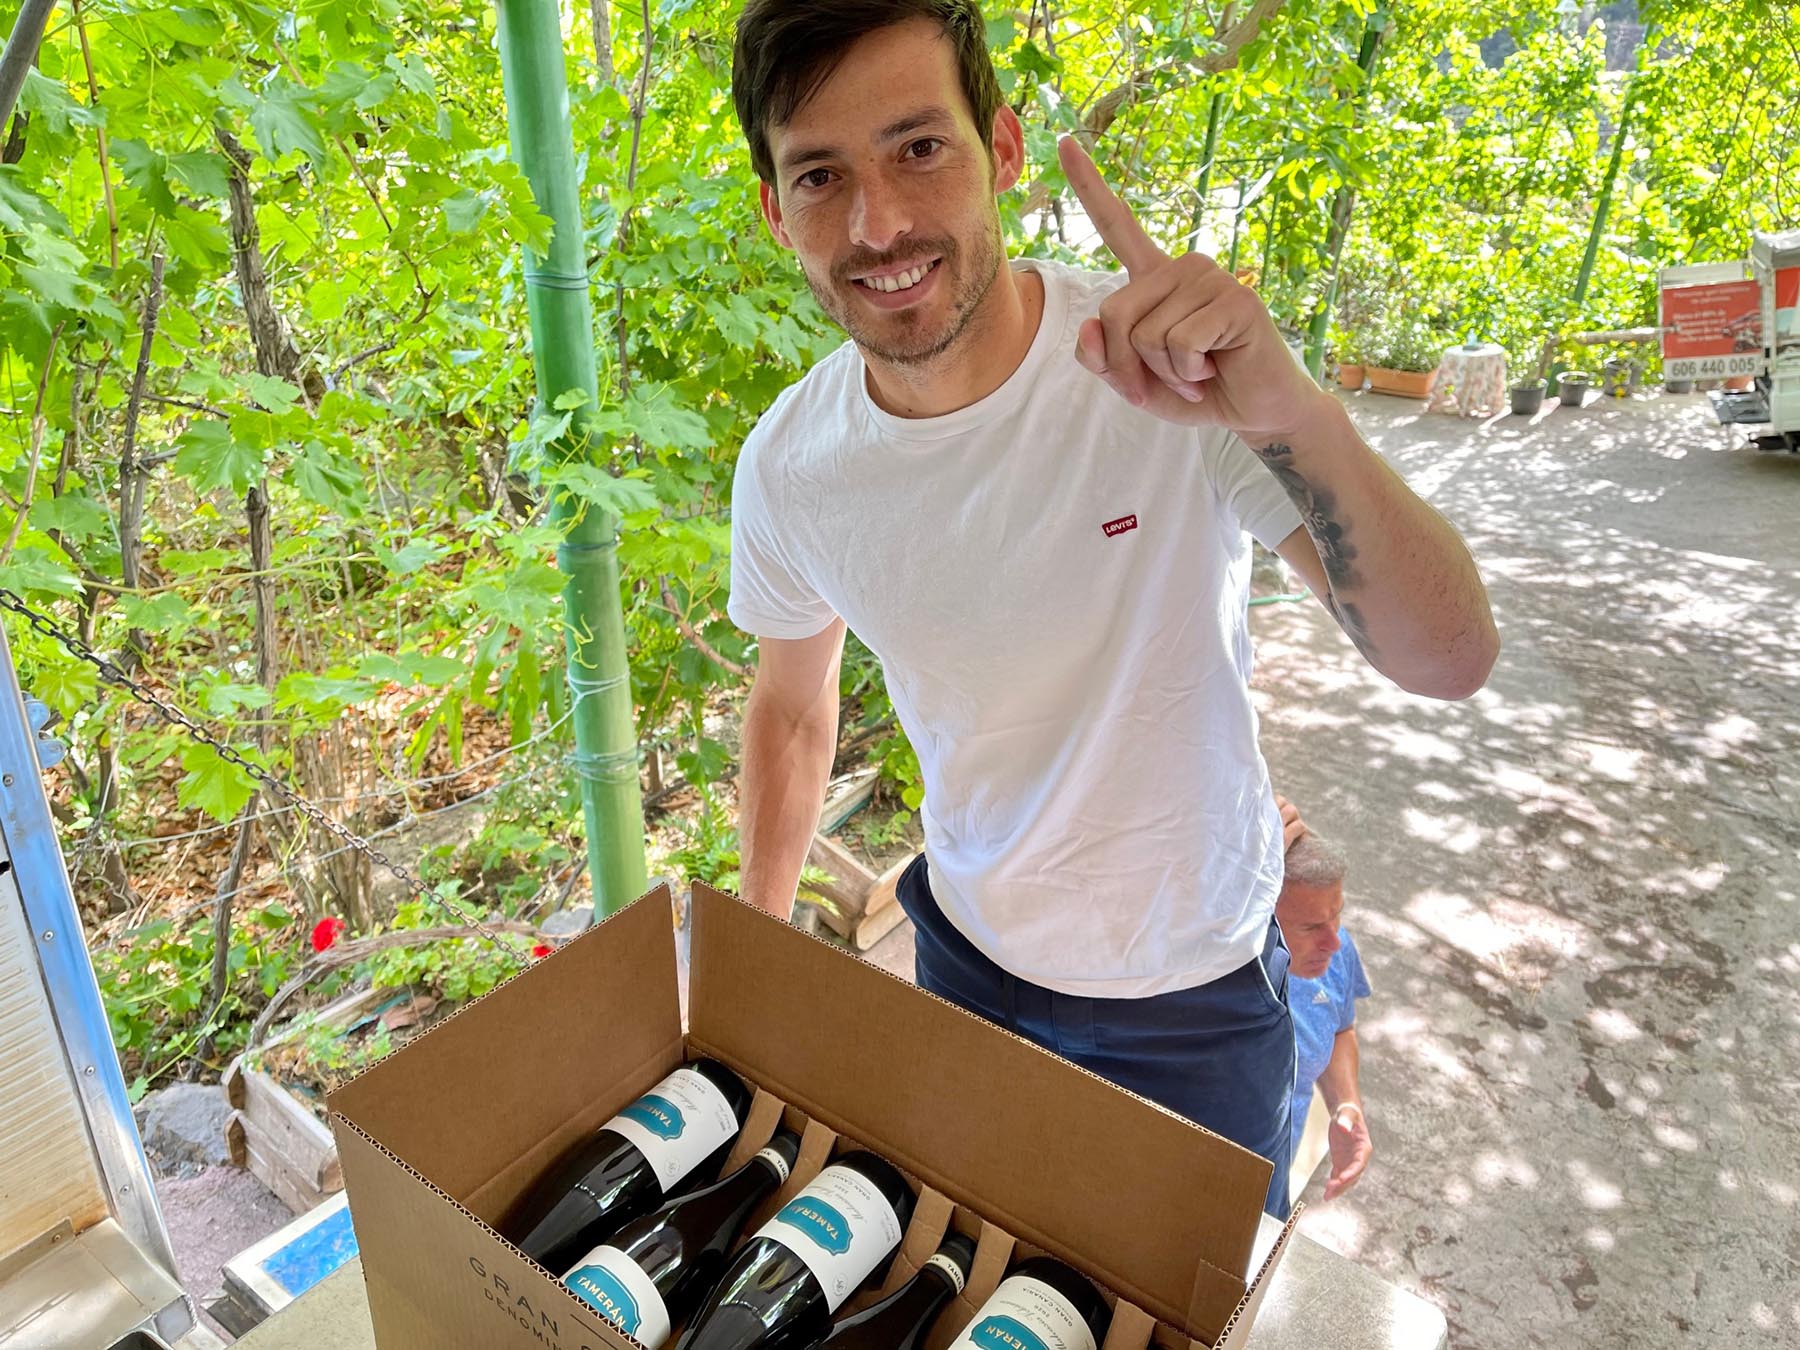 David Silva is a massive wine fan, who's determined to put Canary Island wines on the map